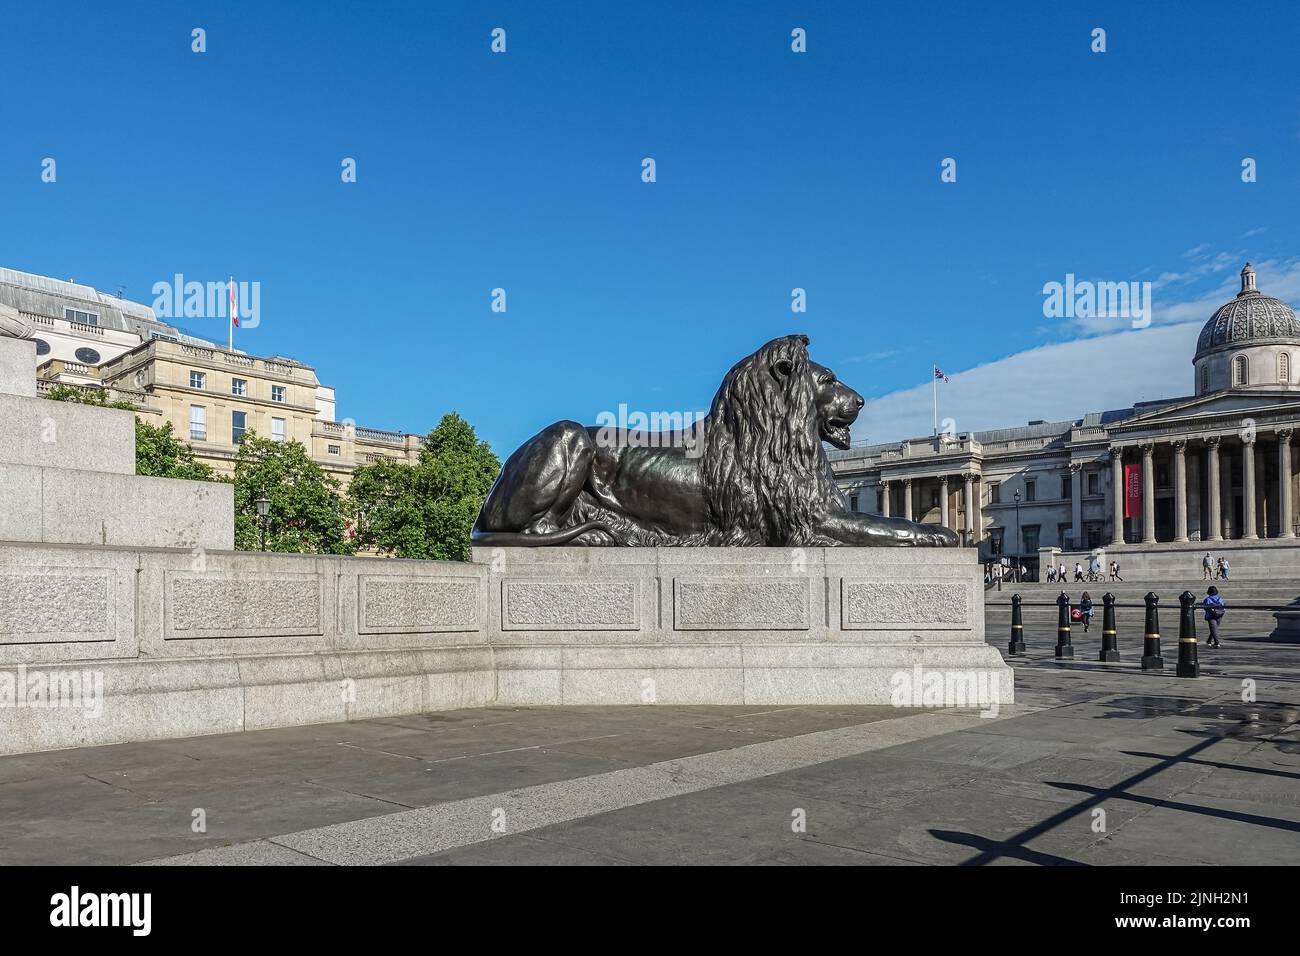 London, UK- July 4, 2022: Trafalgar Square. Black lion statue and National Gallery under blue sky. High Commission of Canada building with flag on the Stock Photo